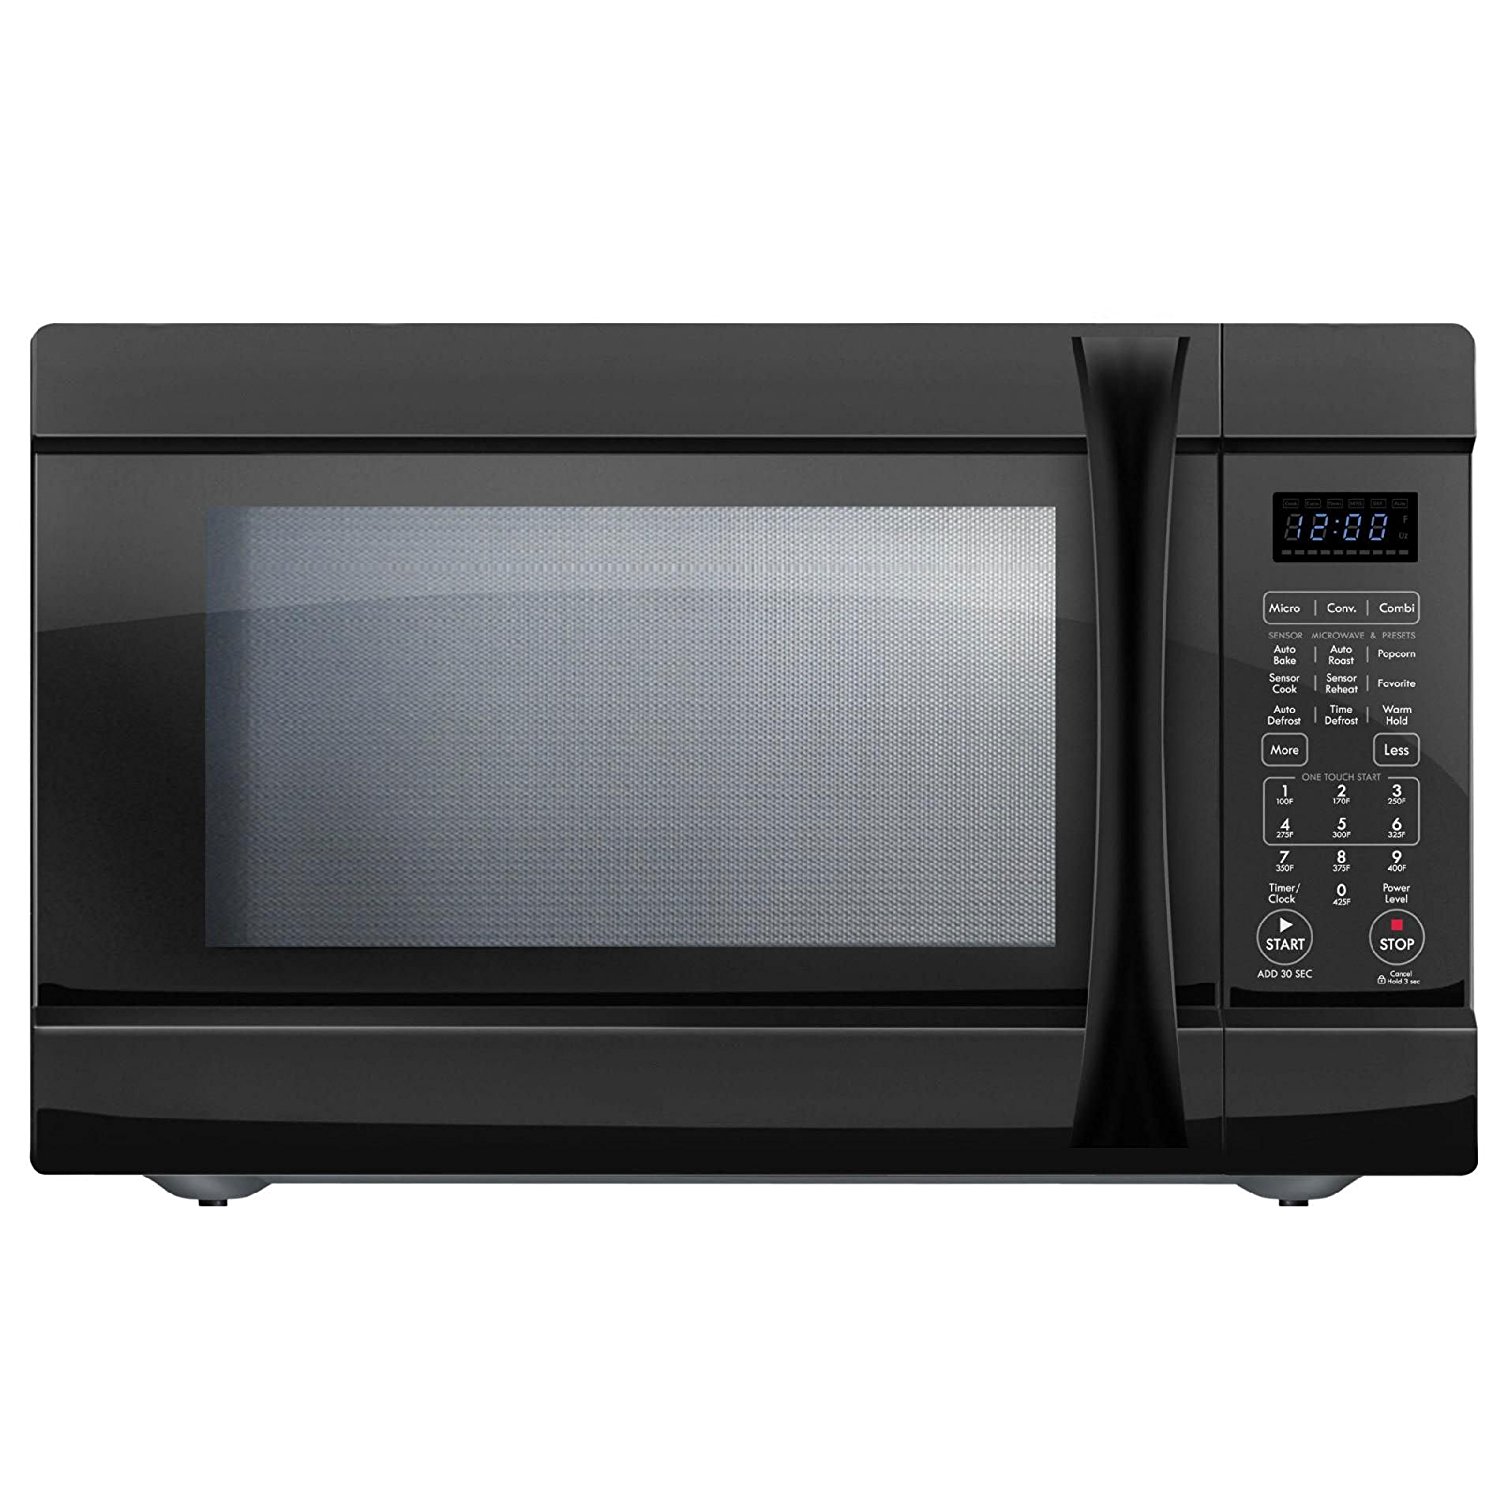 Chef Star CS74159 1.5 cu.ft. 1000 watts w/ Convection Countertop Microwave Black (Certified Refurbished)